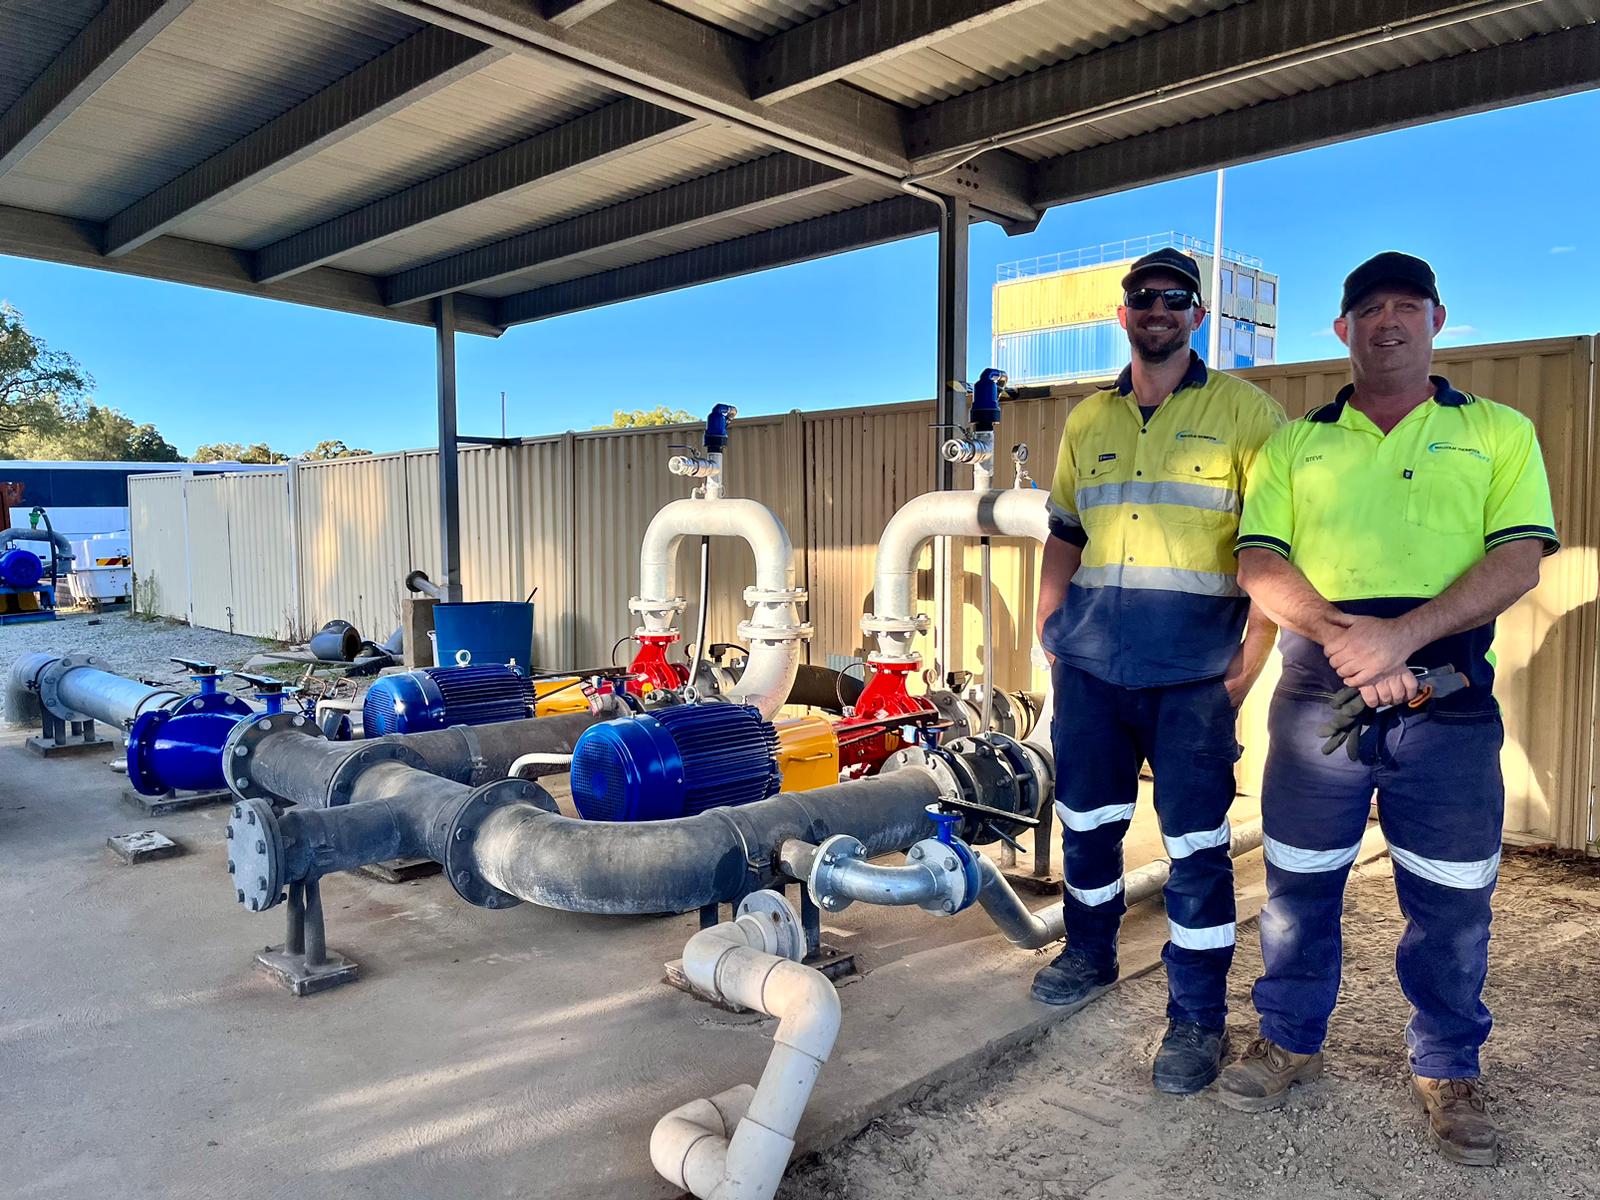 From Old to New: MTP Upgrades Hot Fire Training Dam Pumpset with Modern Features